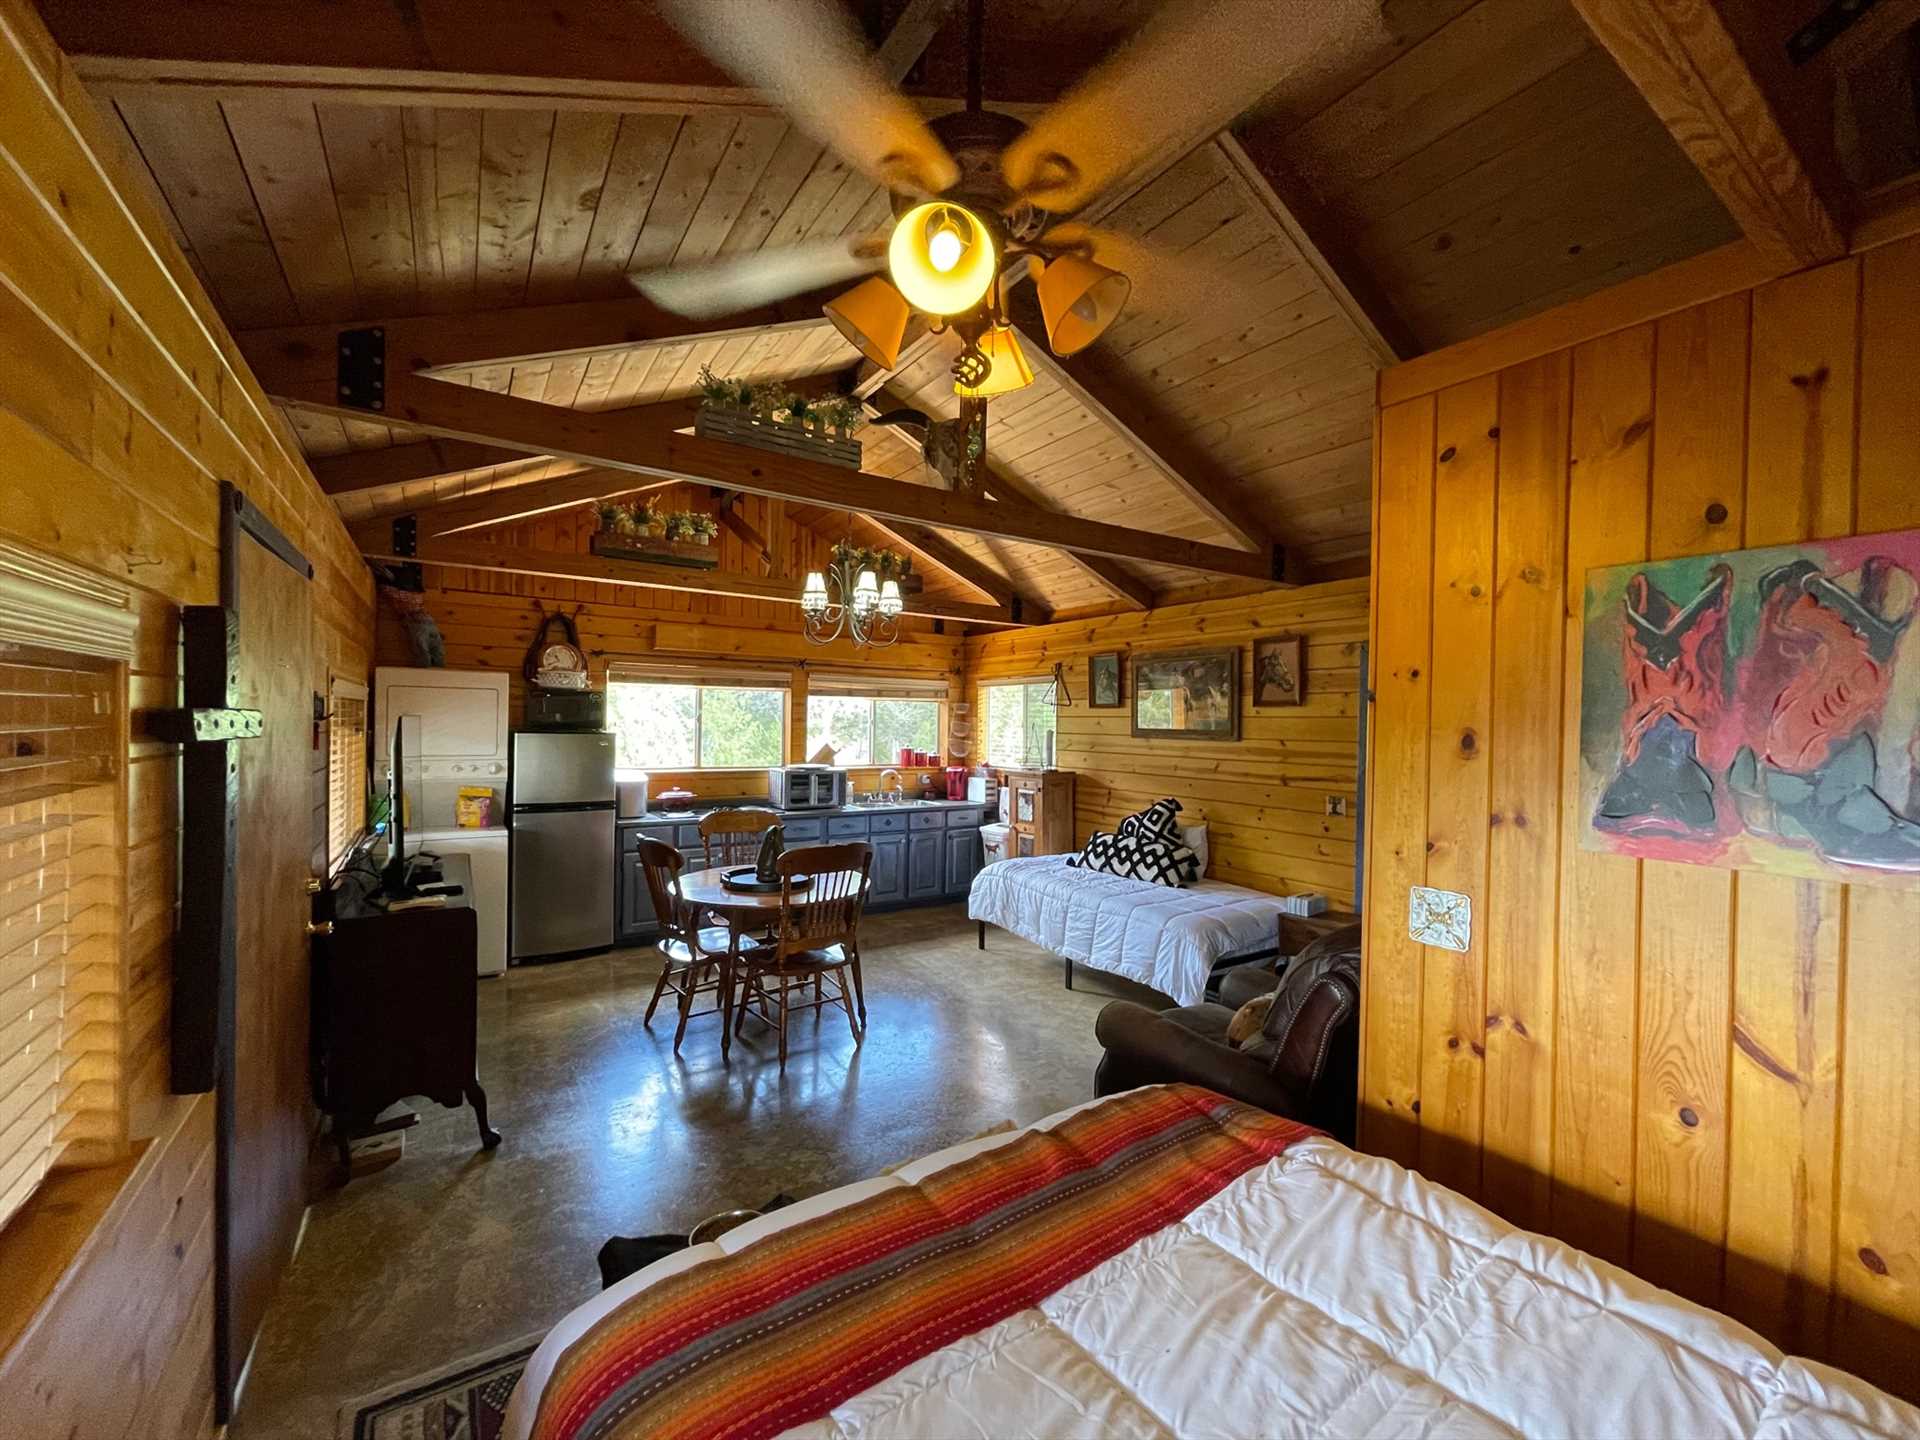                                                 Beamed ceilings, rich woodwork, and an equine decorative theme give Giddy Up a wonderful Texas Hill Country aura.